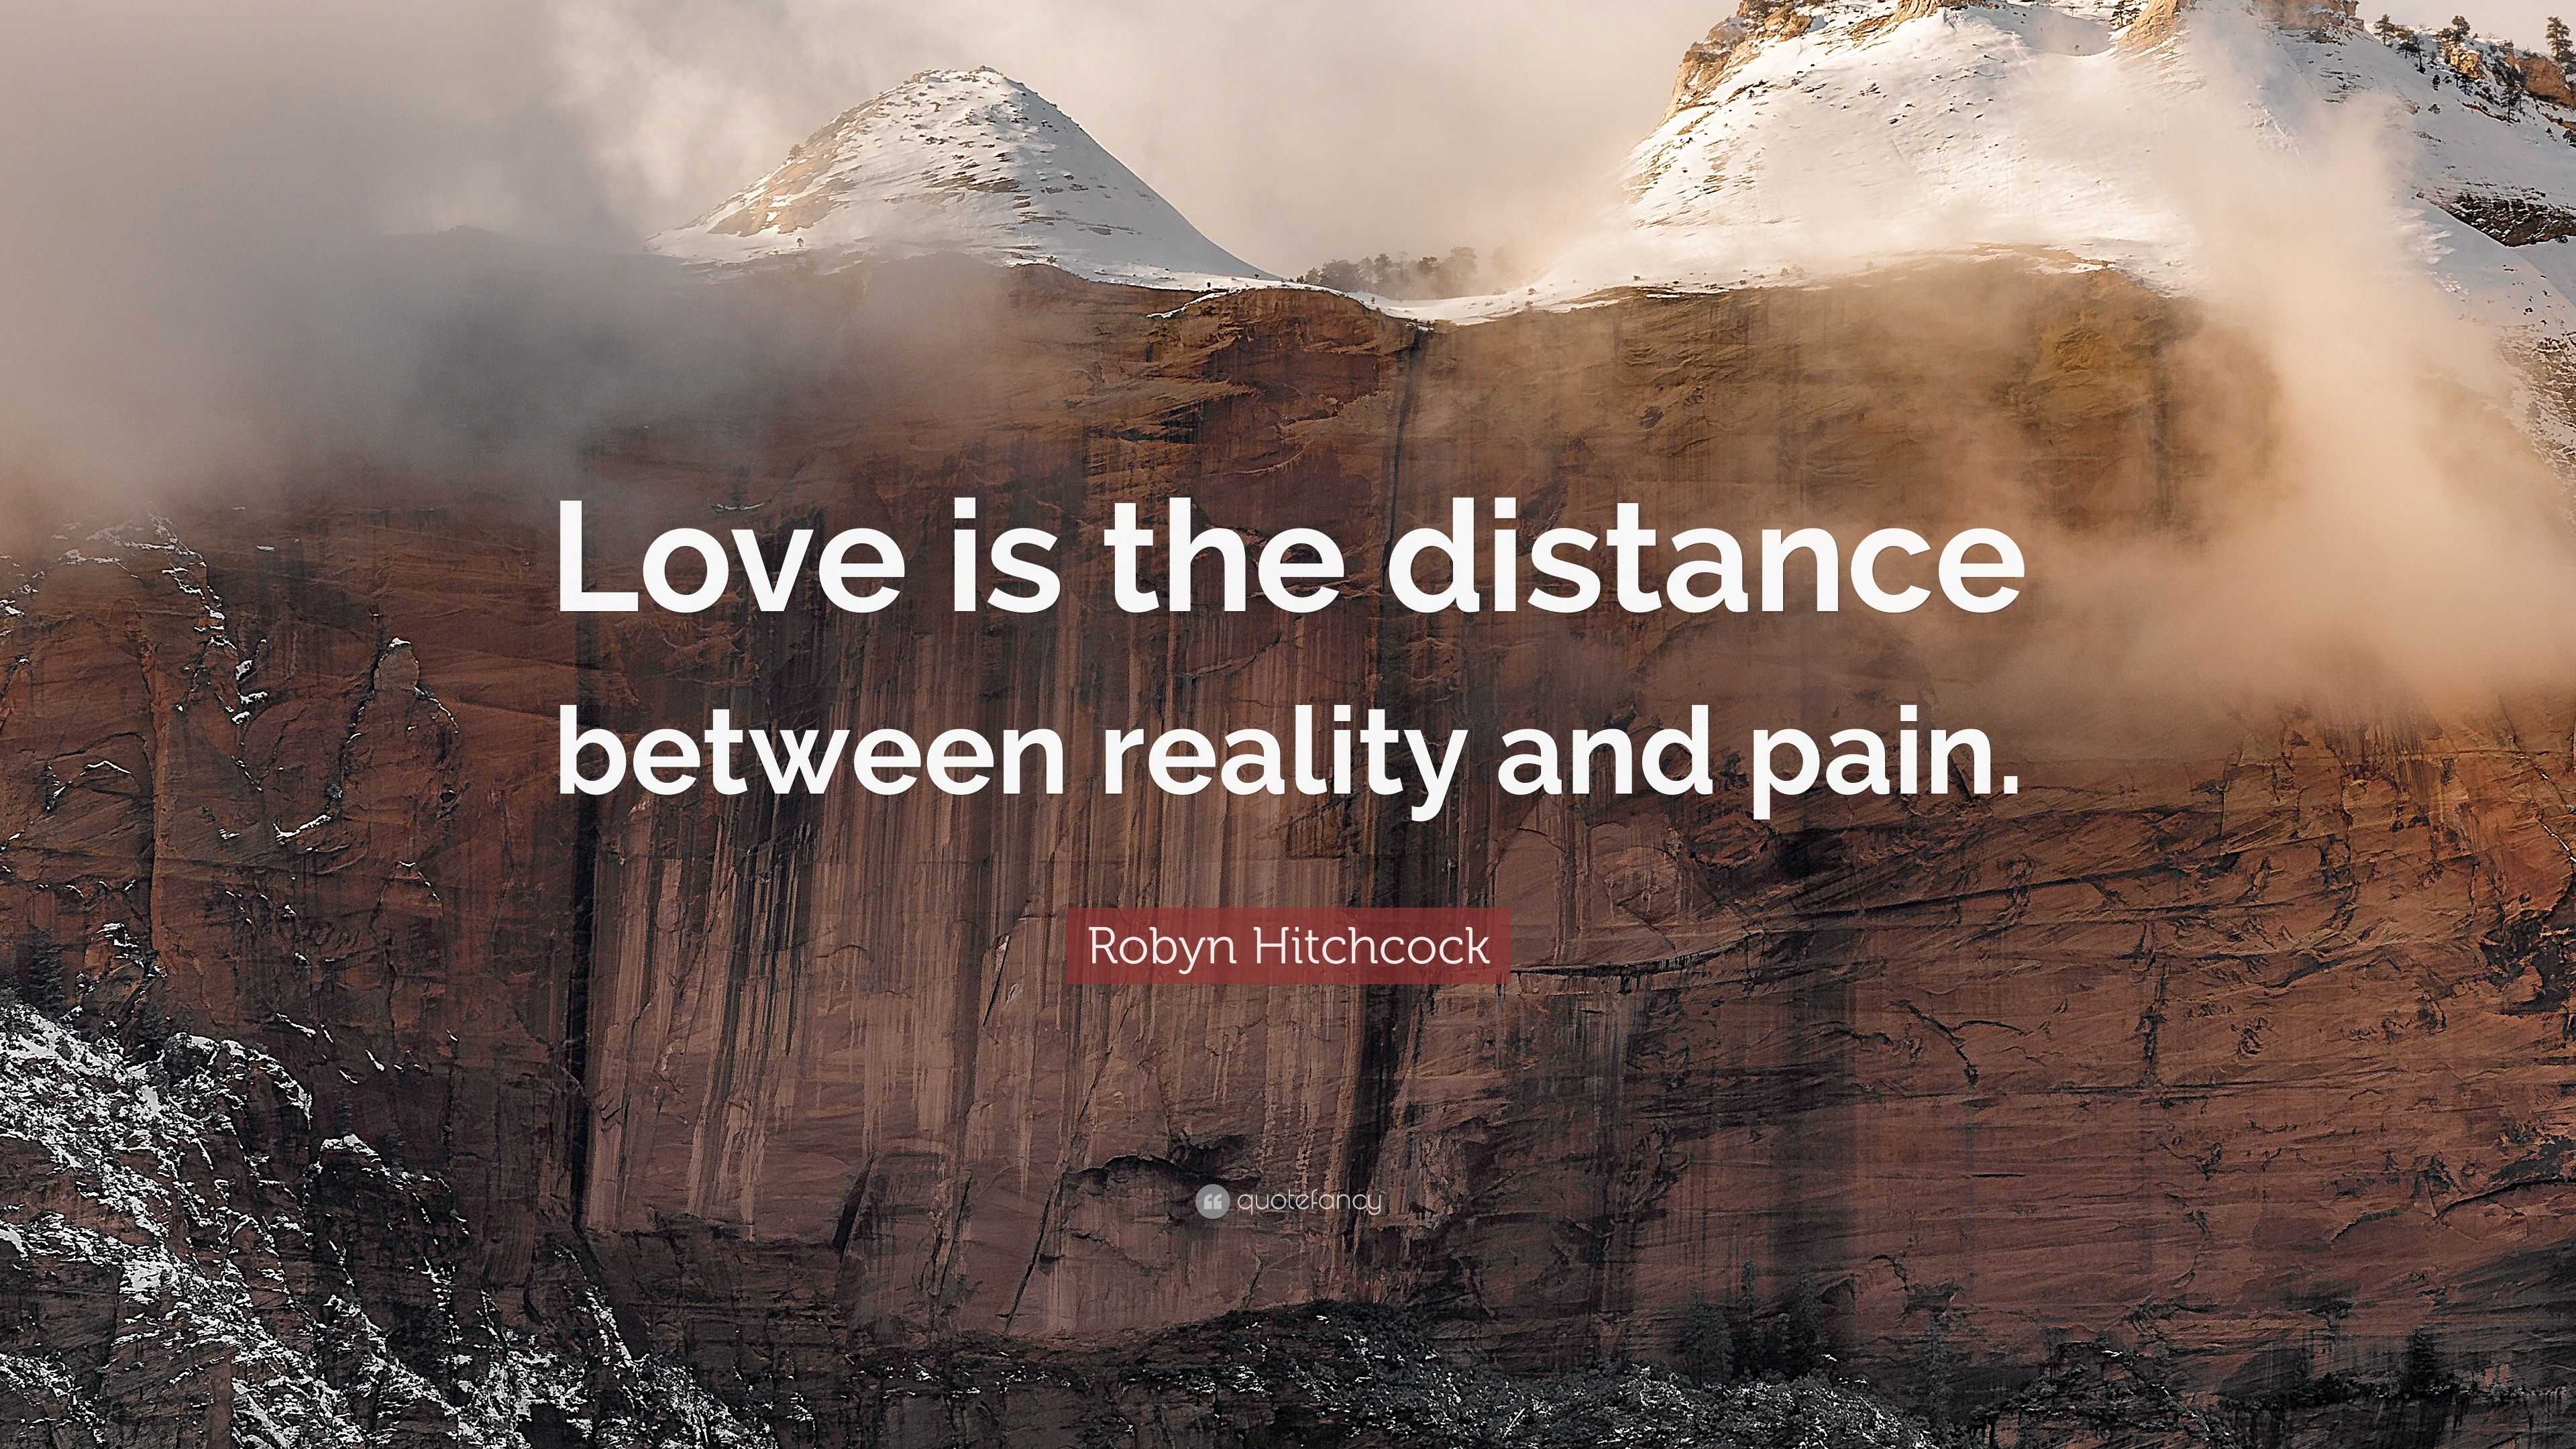 Love of the distance Therapists Share